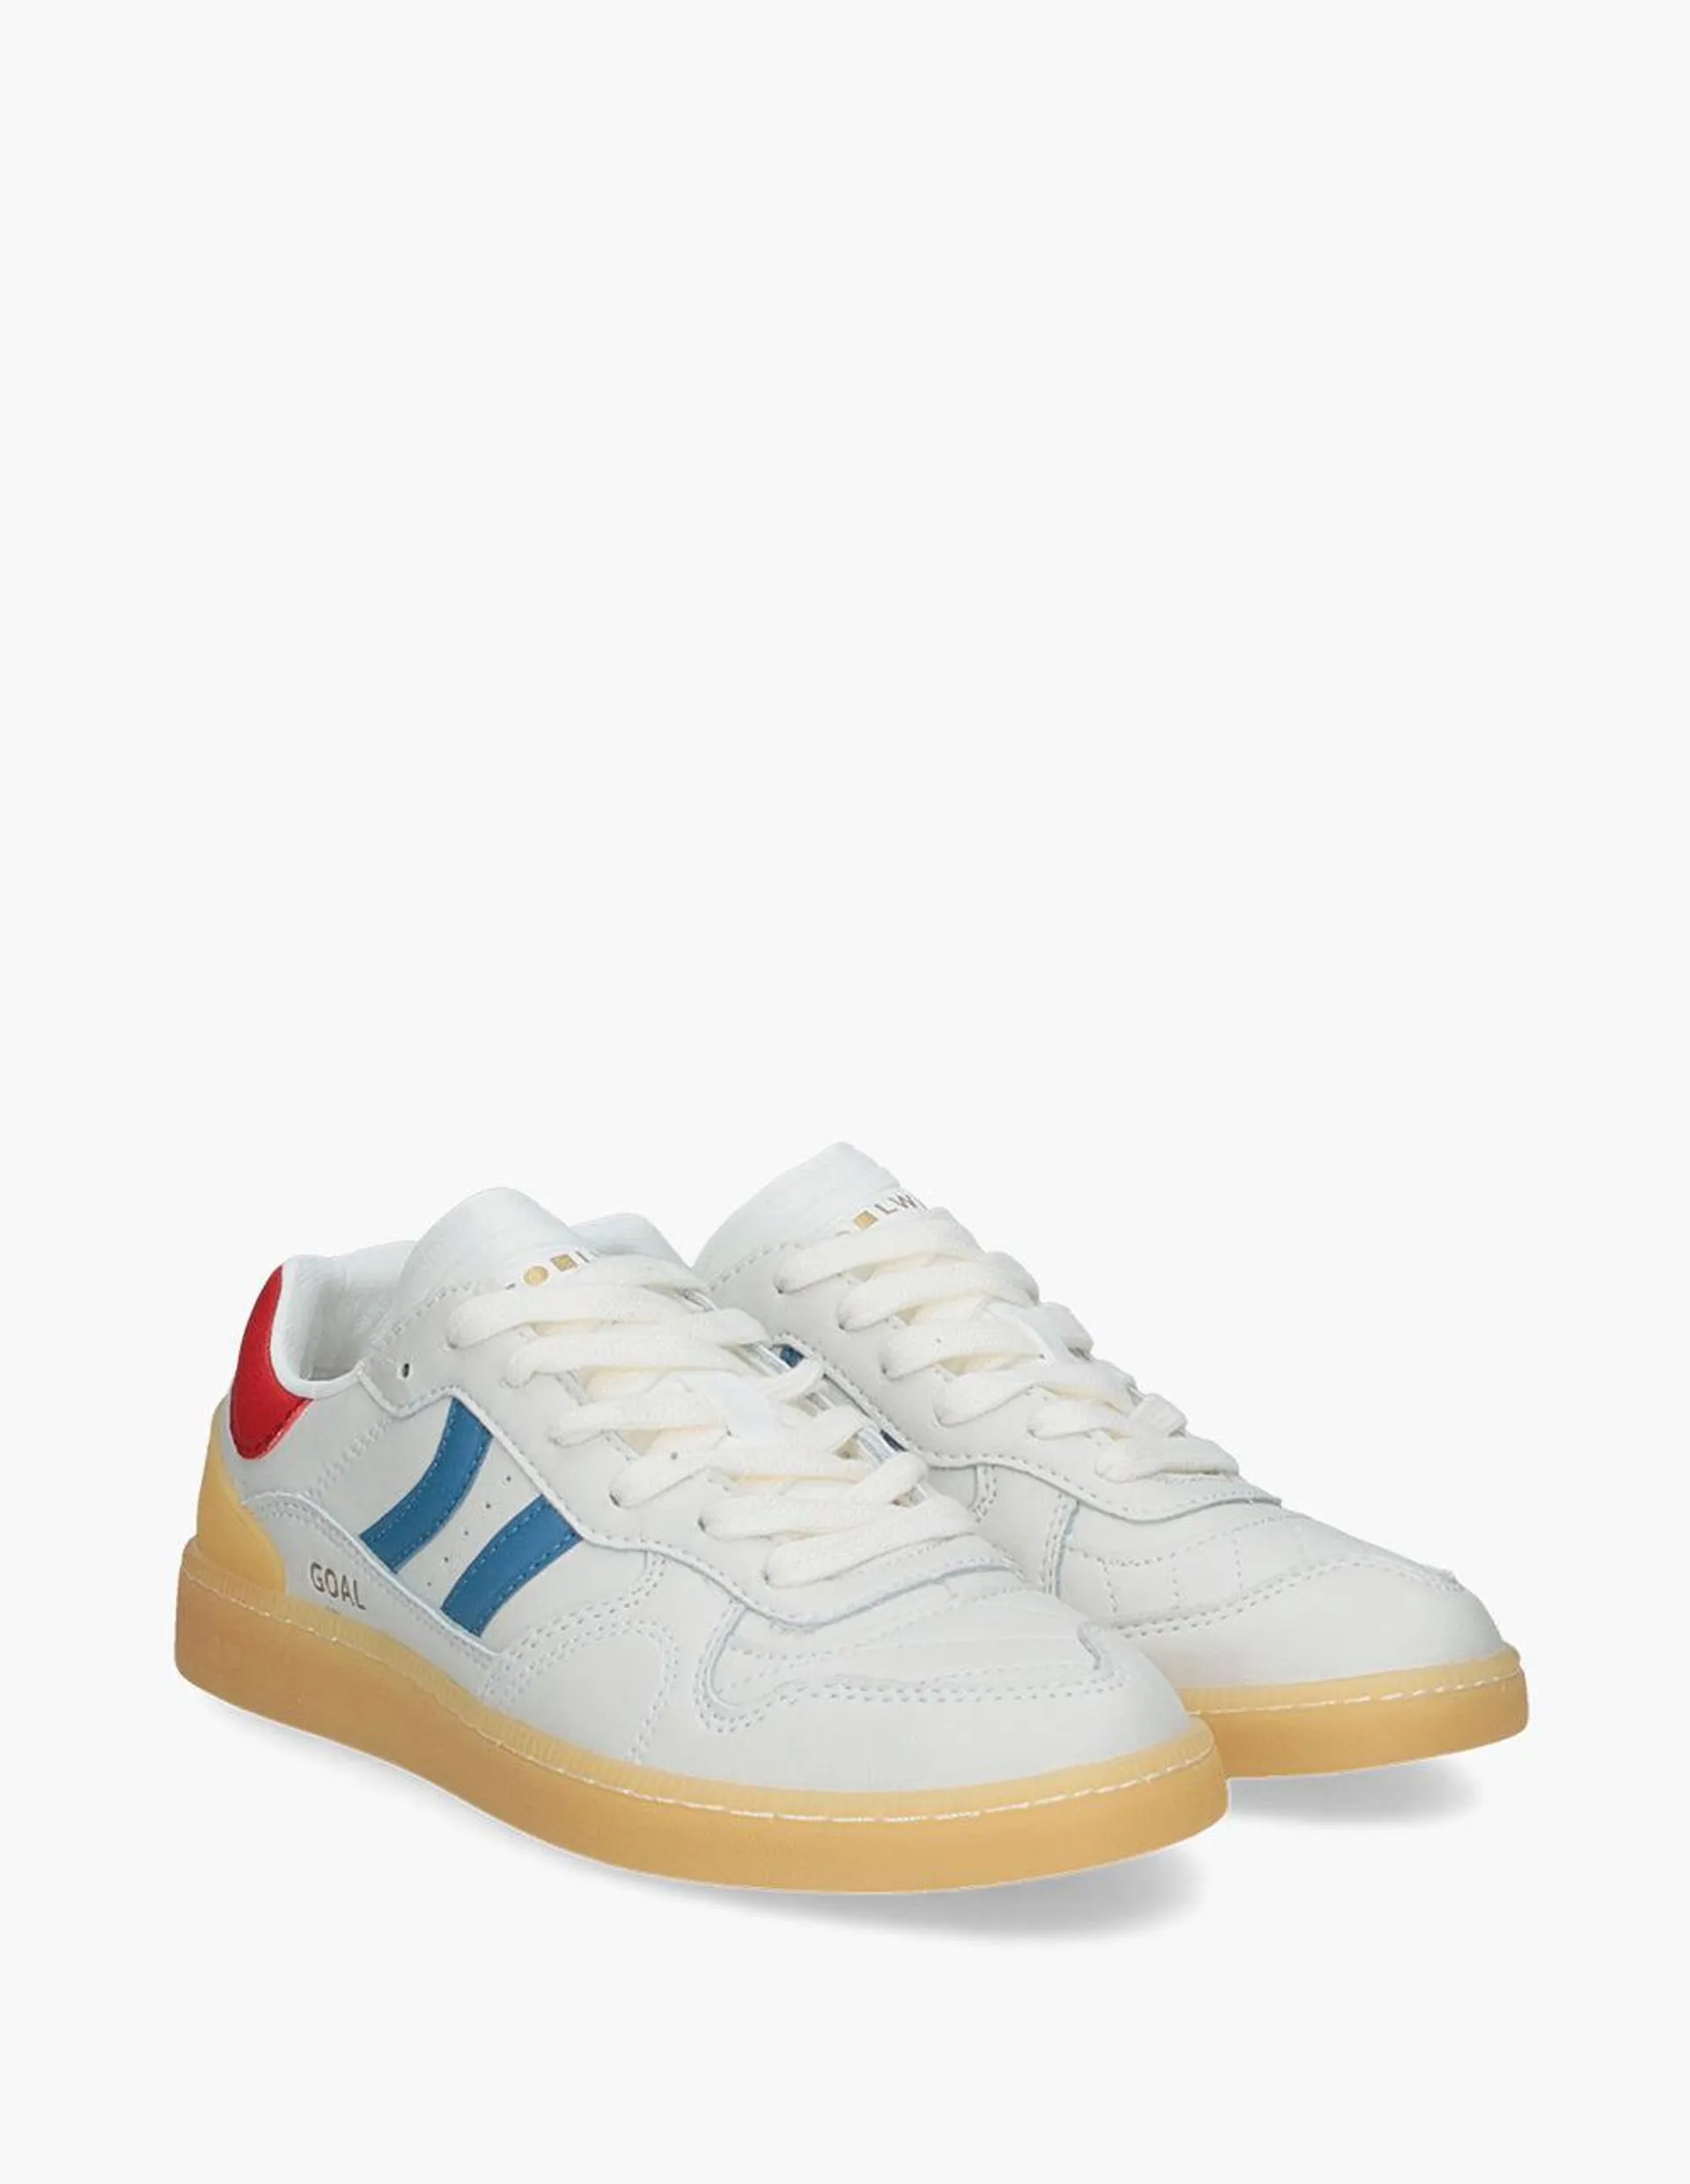 GOAL WHITE LEATHER HOMBRE